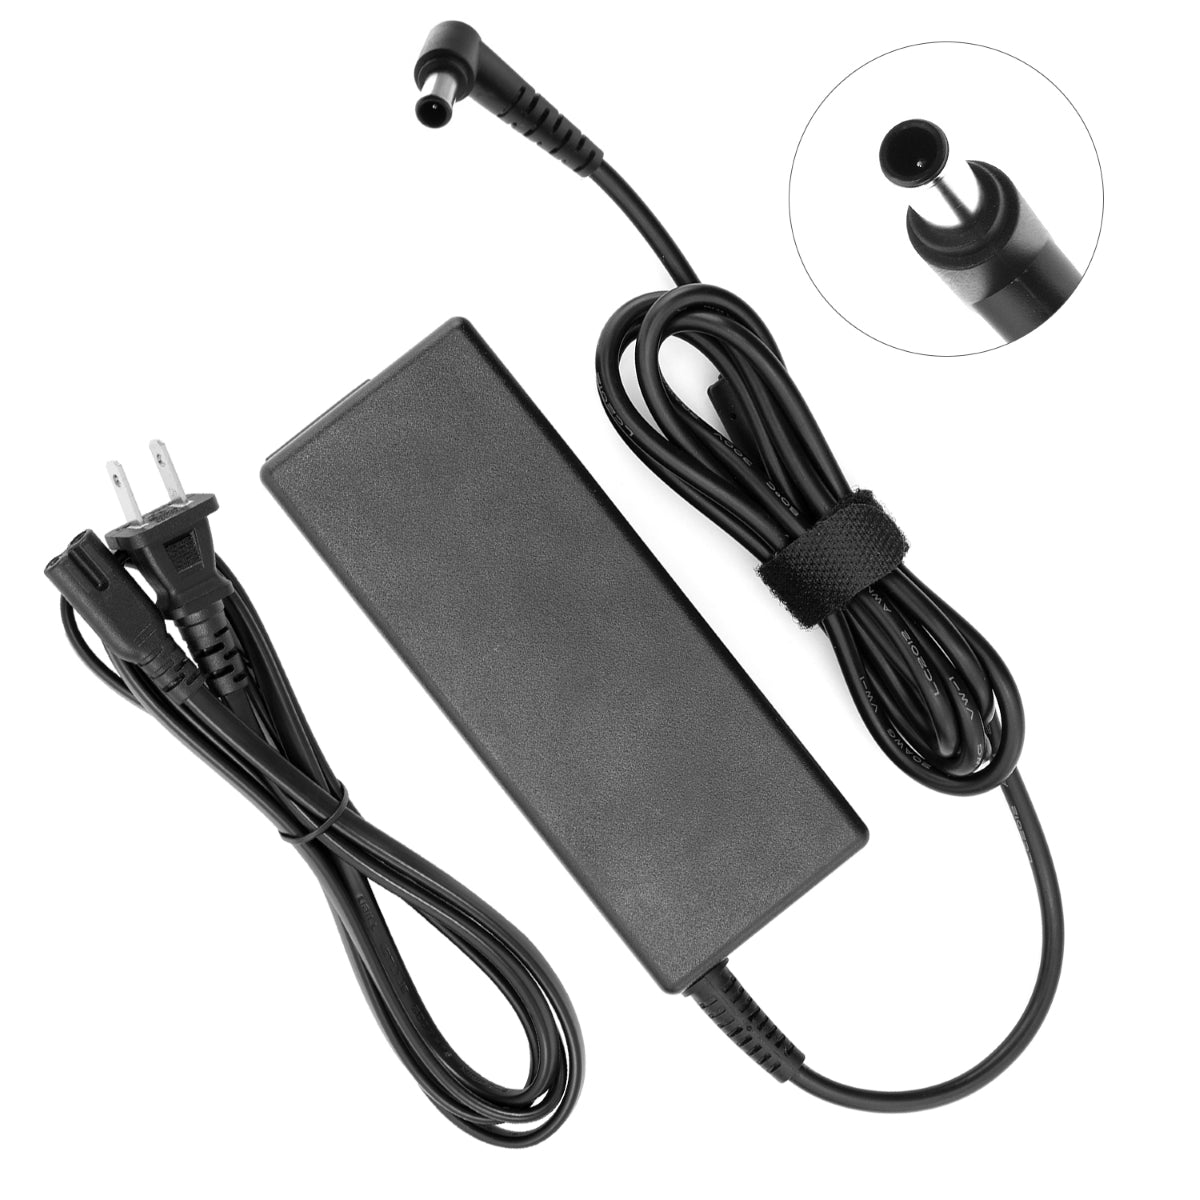 AC Adapter Power Supply for Samsung SYNCM770TFT Monitor